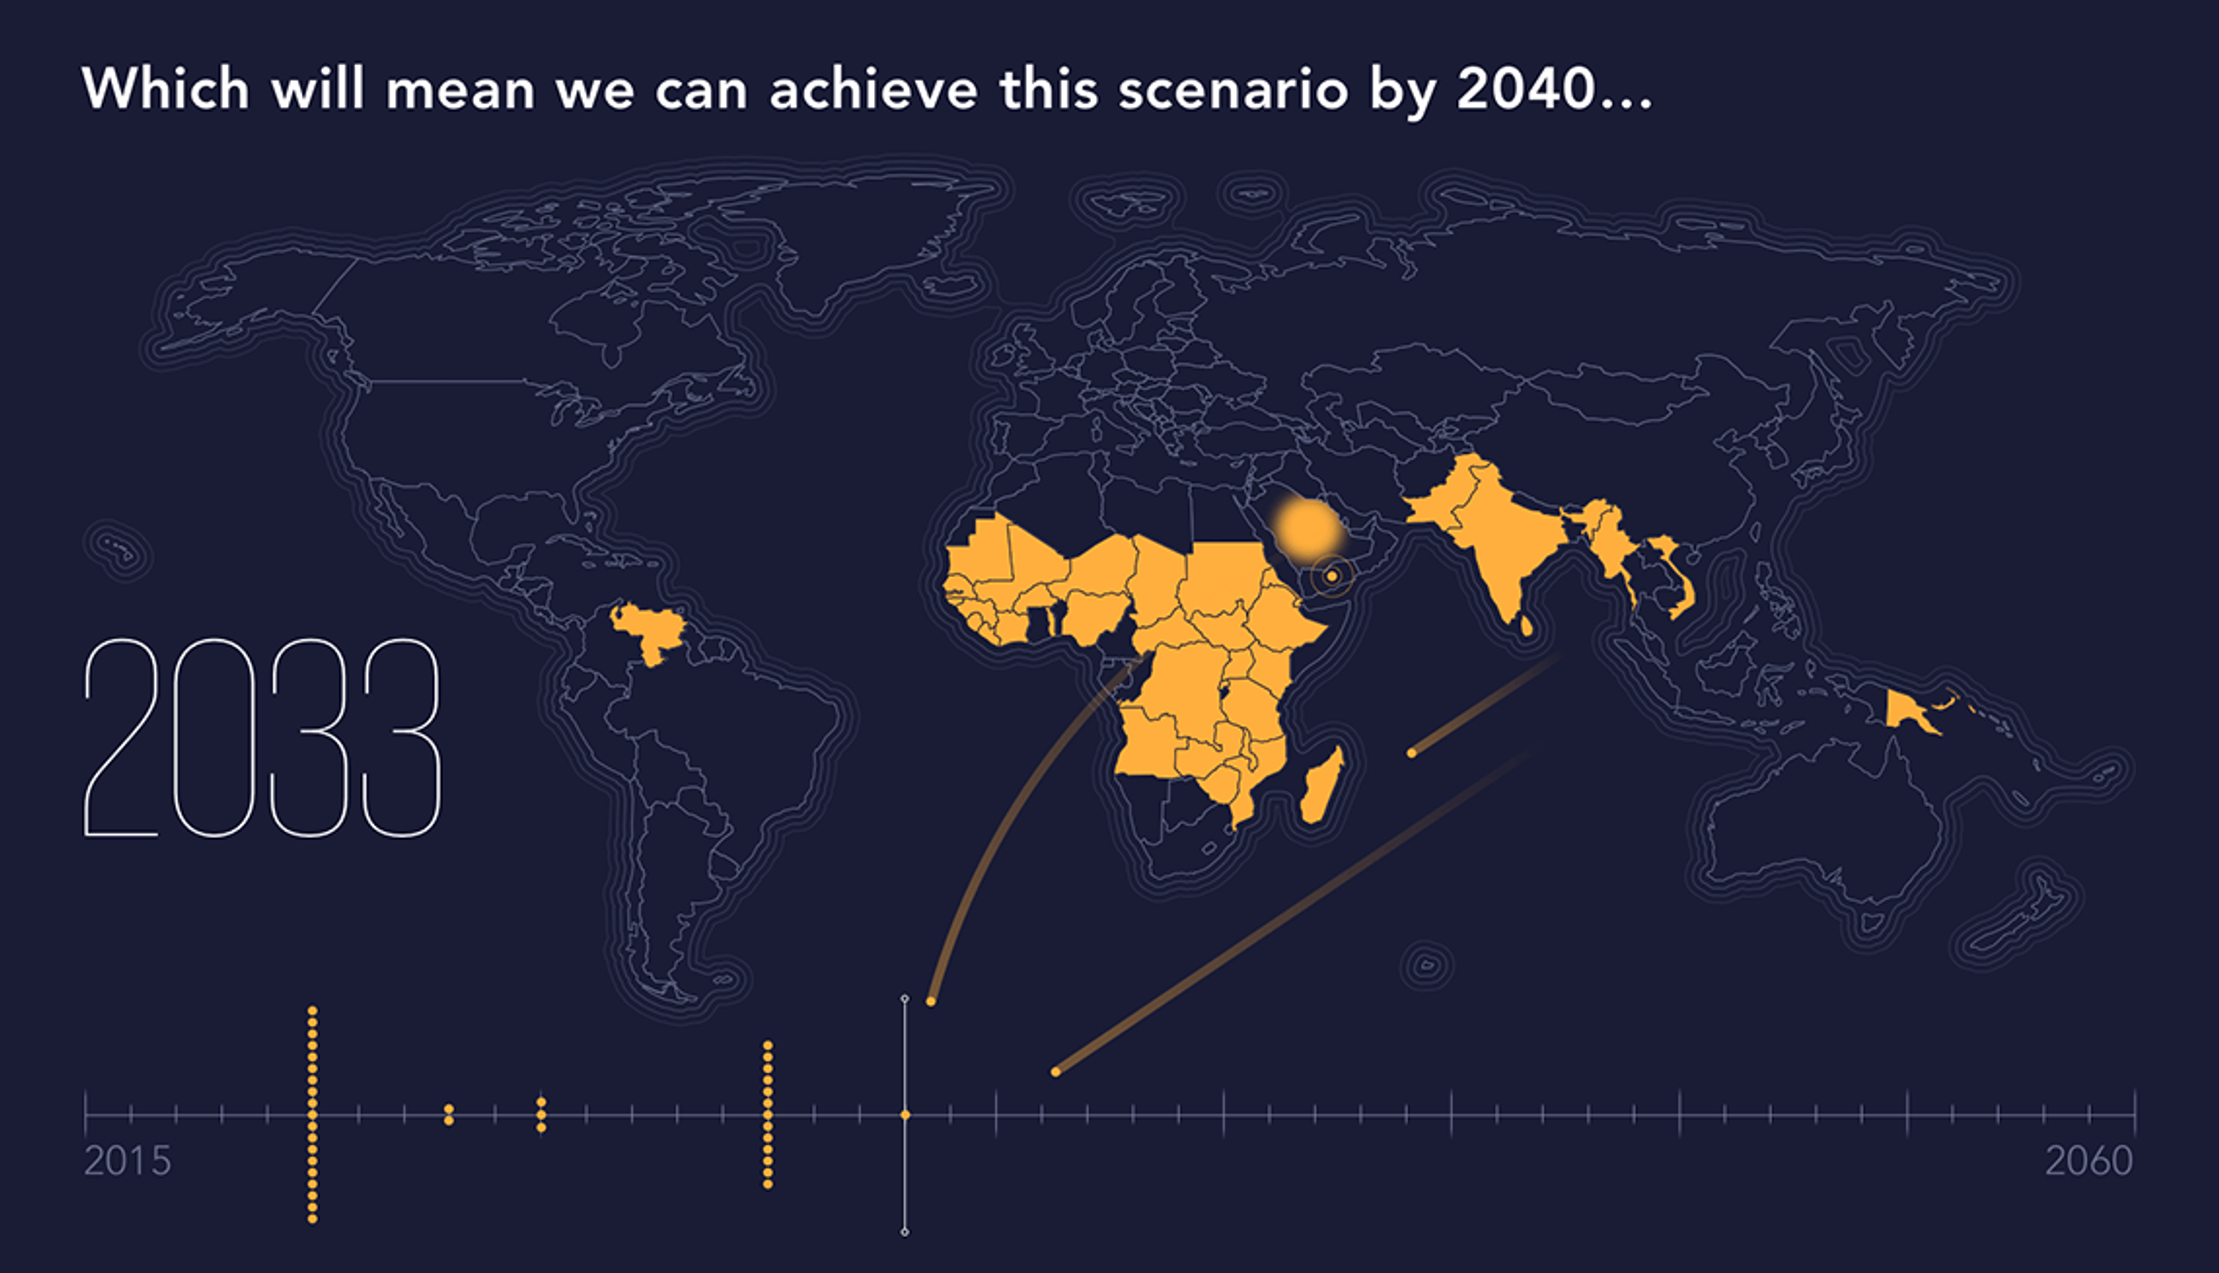 A dark blue world map with a timeline spanning 2015 to 2060. The year visualised is 2033 where countries that may still face malaria transmission are in yellow. Yellow dots from countries that have eradicated malaria have turned into yellow dots and are falling to mark the timeline below.